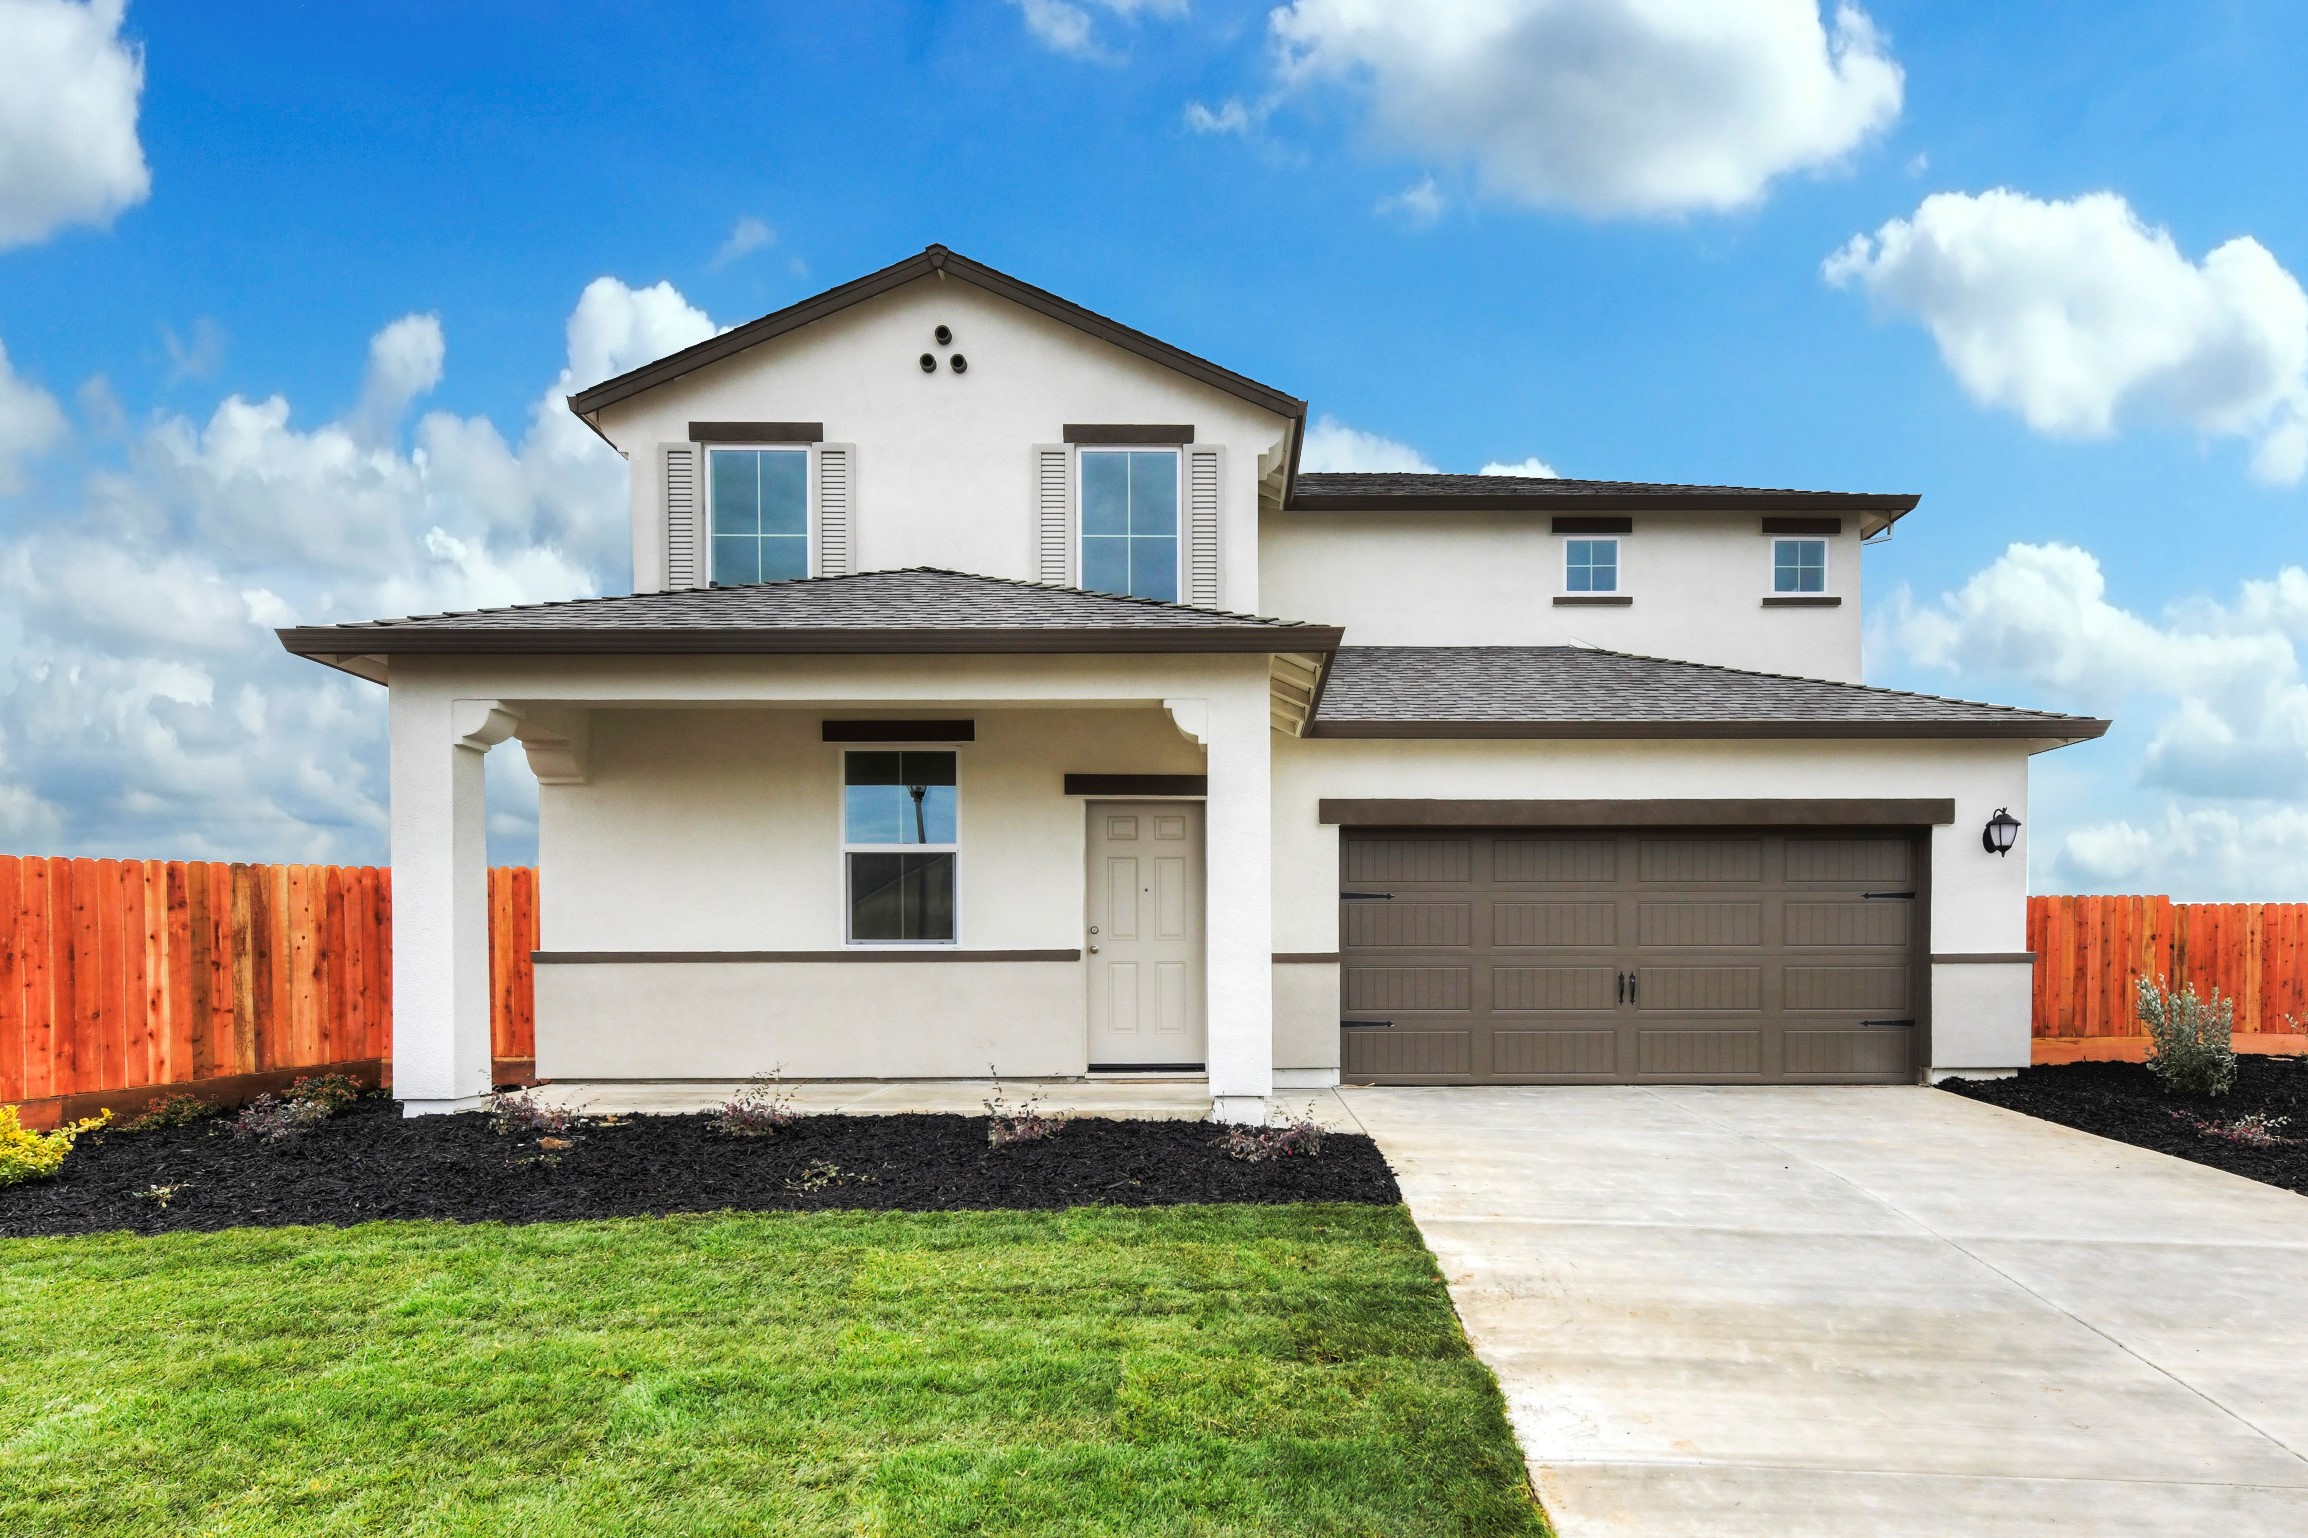 The Stinson plan is a stunning two-story home available now at The Orchards by LGI Homes.